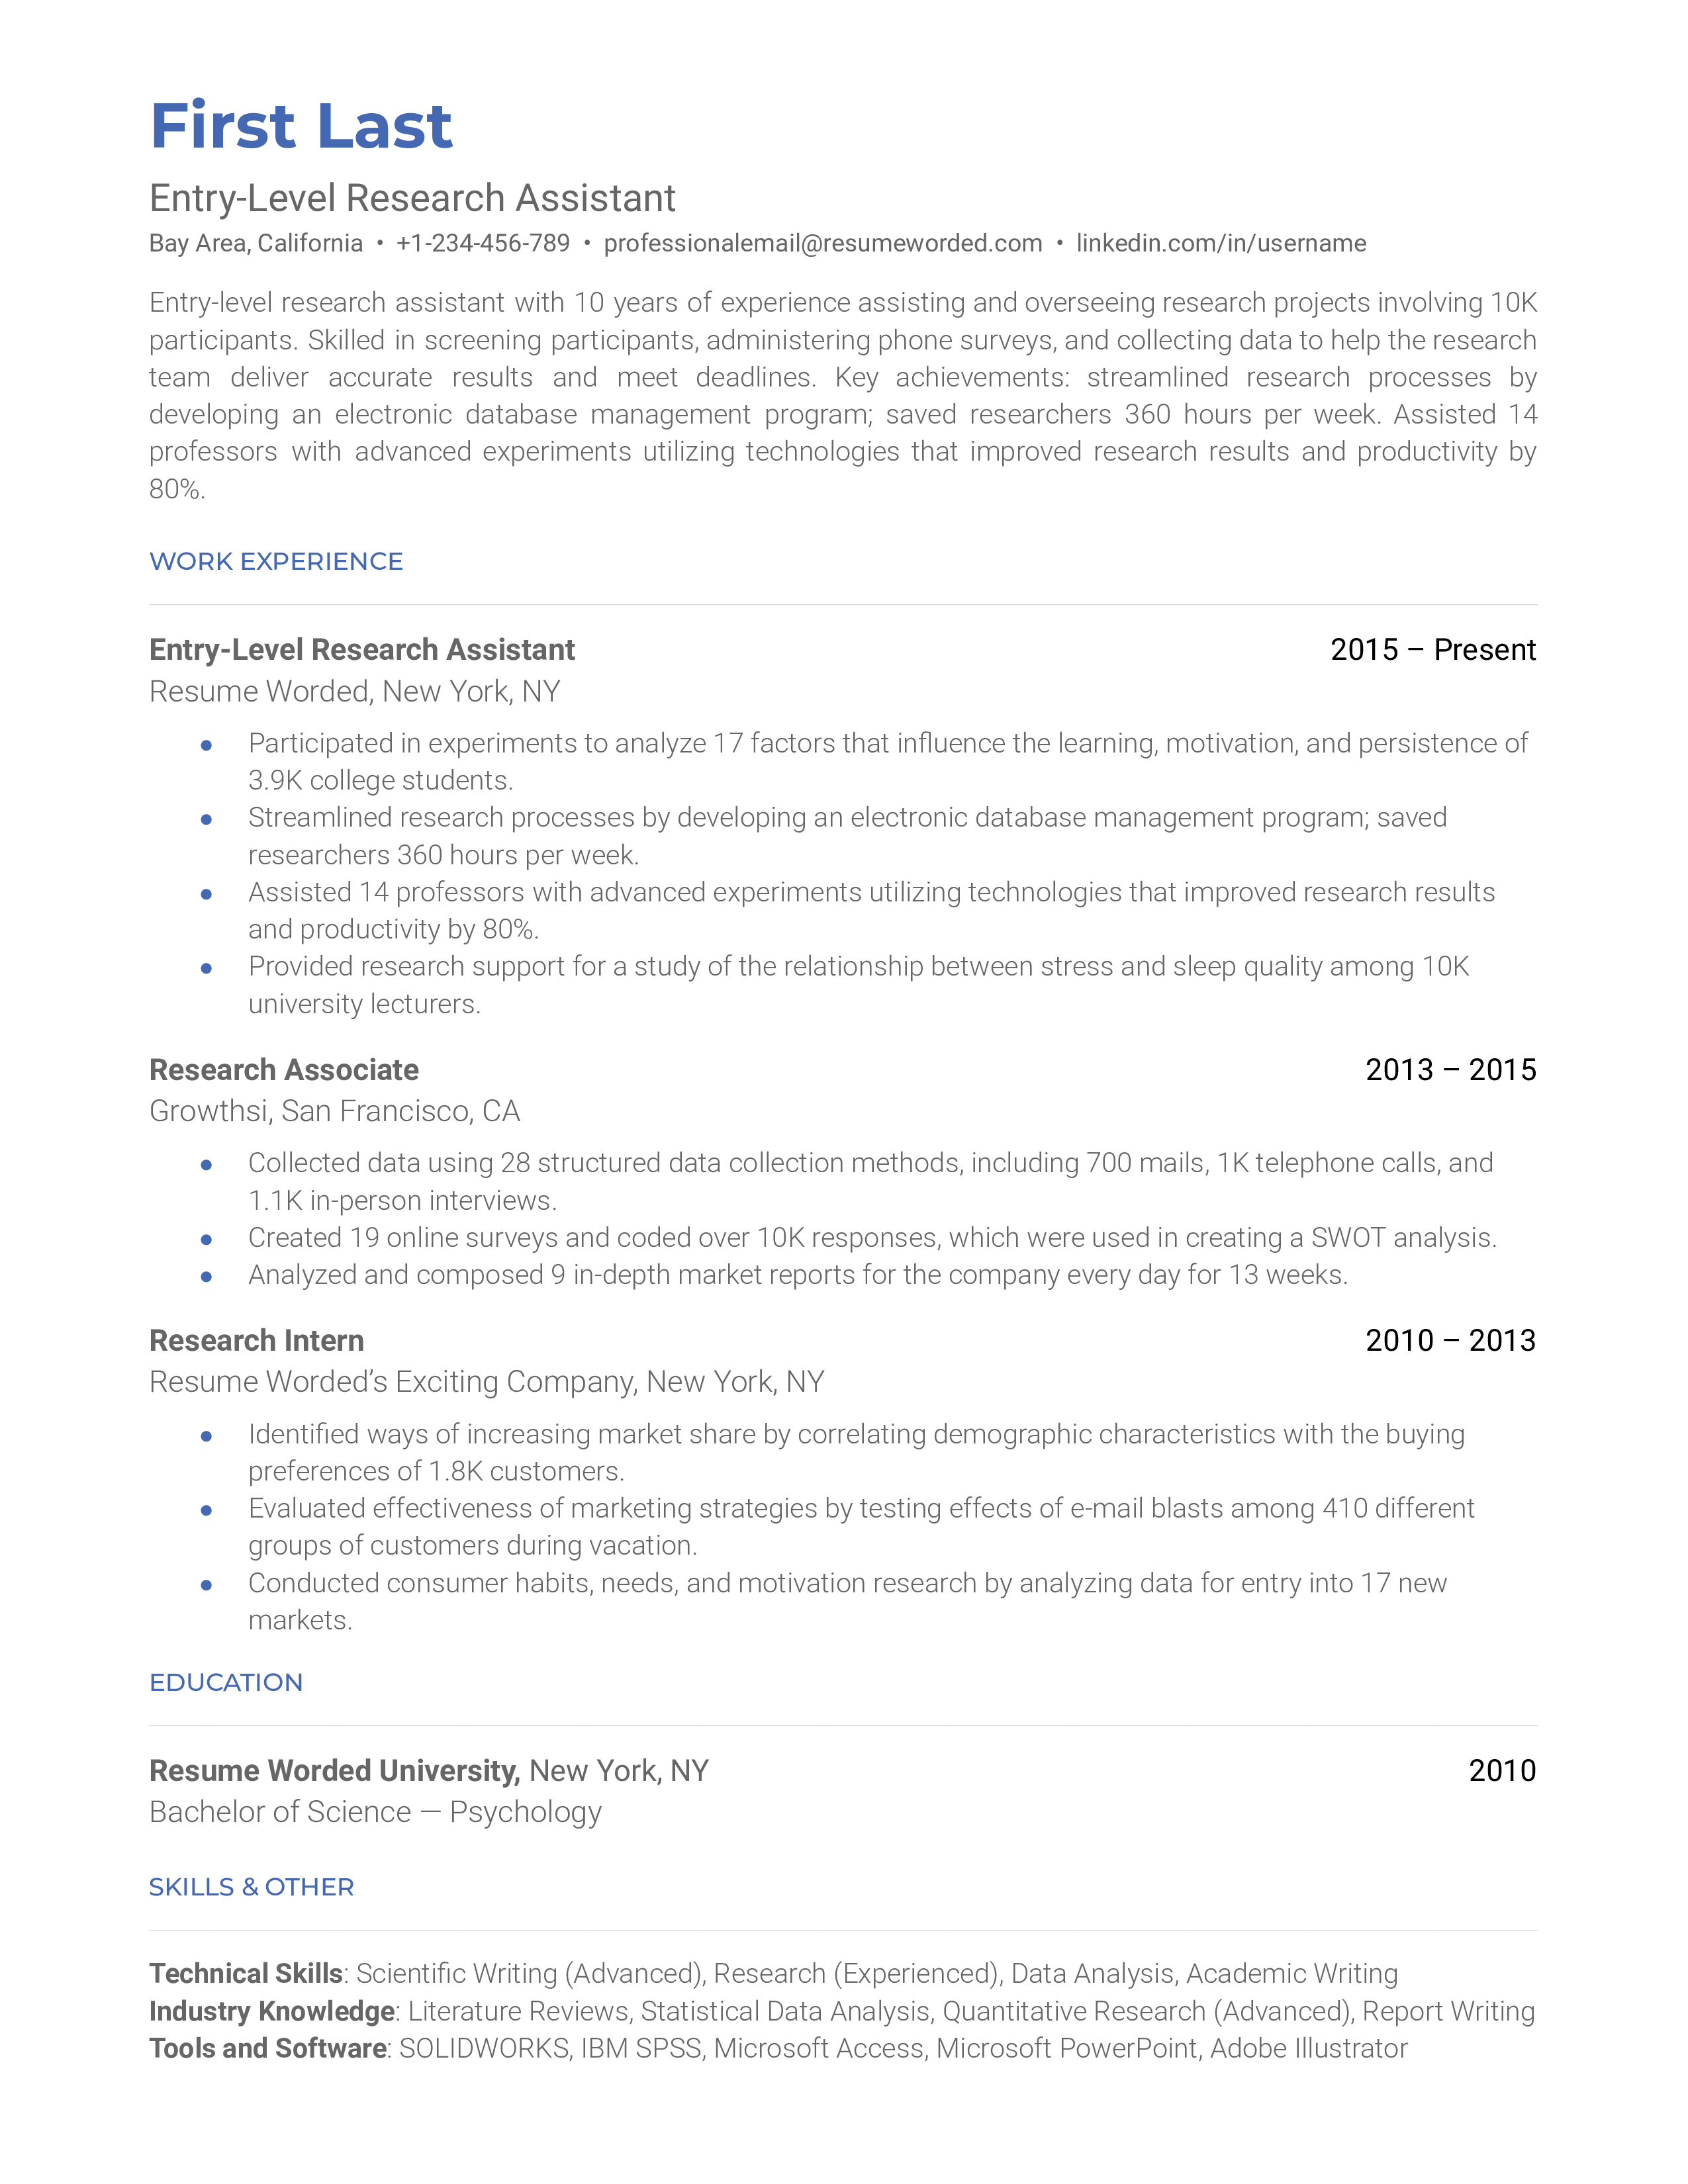 A resume for an entry level research assistant with a degree in psychology and previous work experience as a research associate and intern.